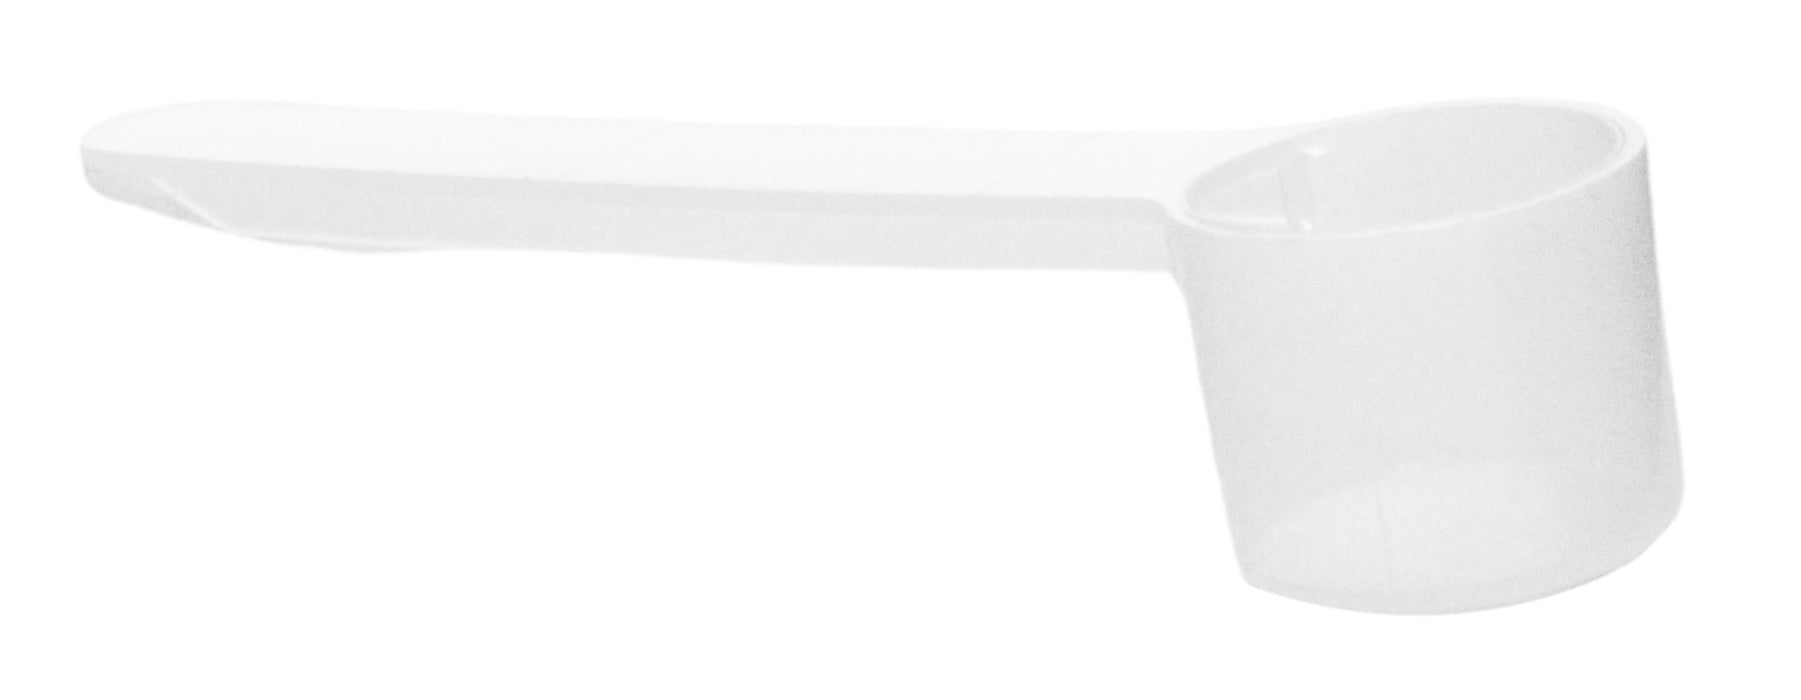 5PK Cup and Scoop Set - 25mL Cups & 2.5mL Scoops - Polypropylene